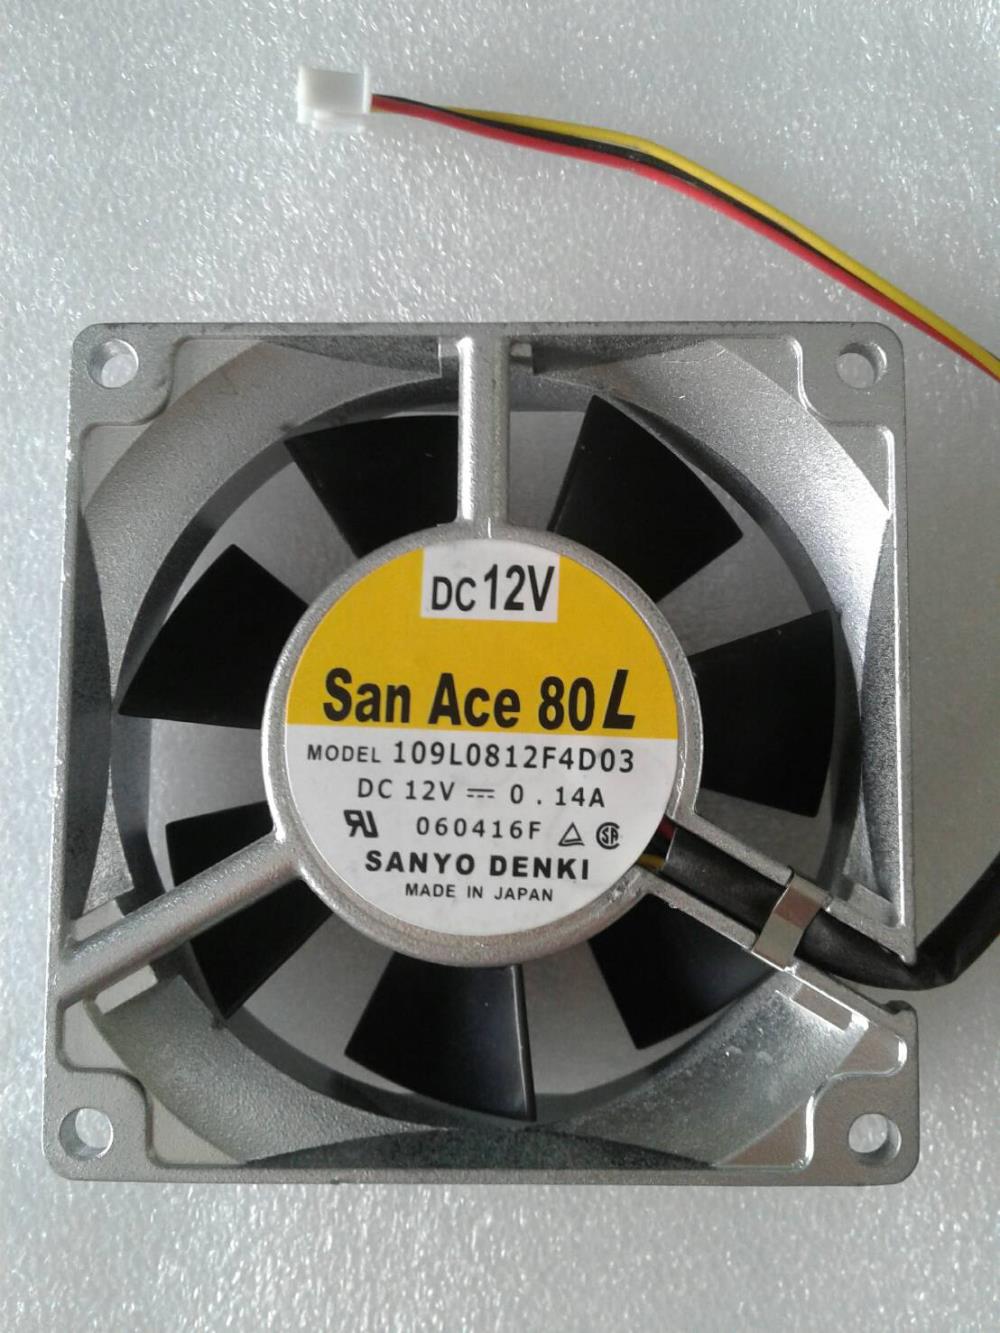 SANYO DENKI FAN,SANYO DENKI FAN,SANYO DENKI ,Plant and Facility Equipment/Facilities Equipment/Fans